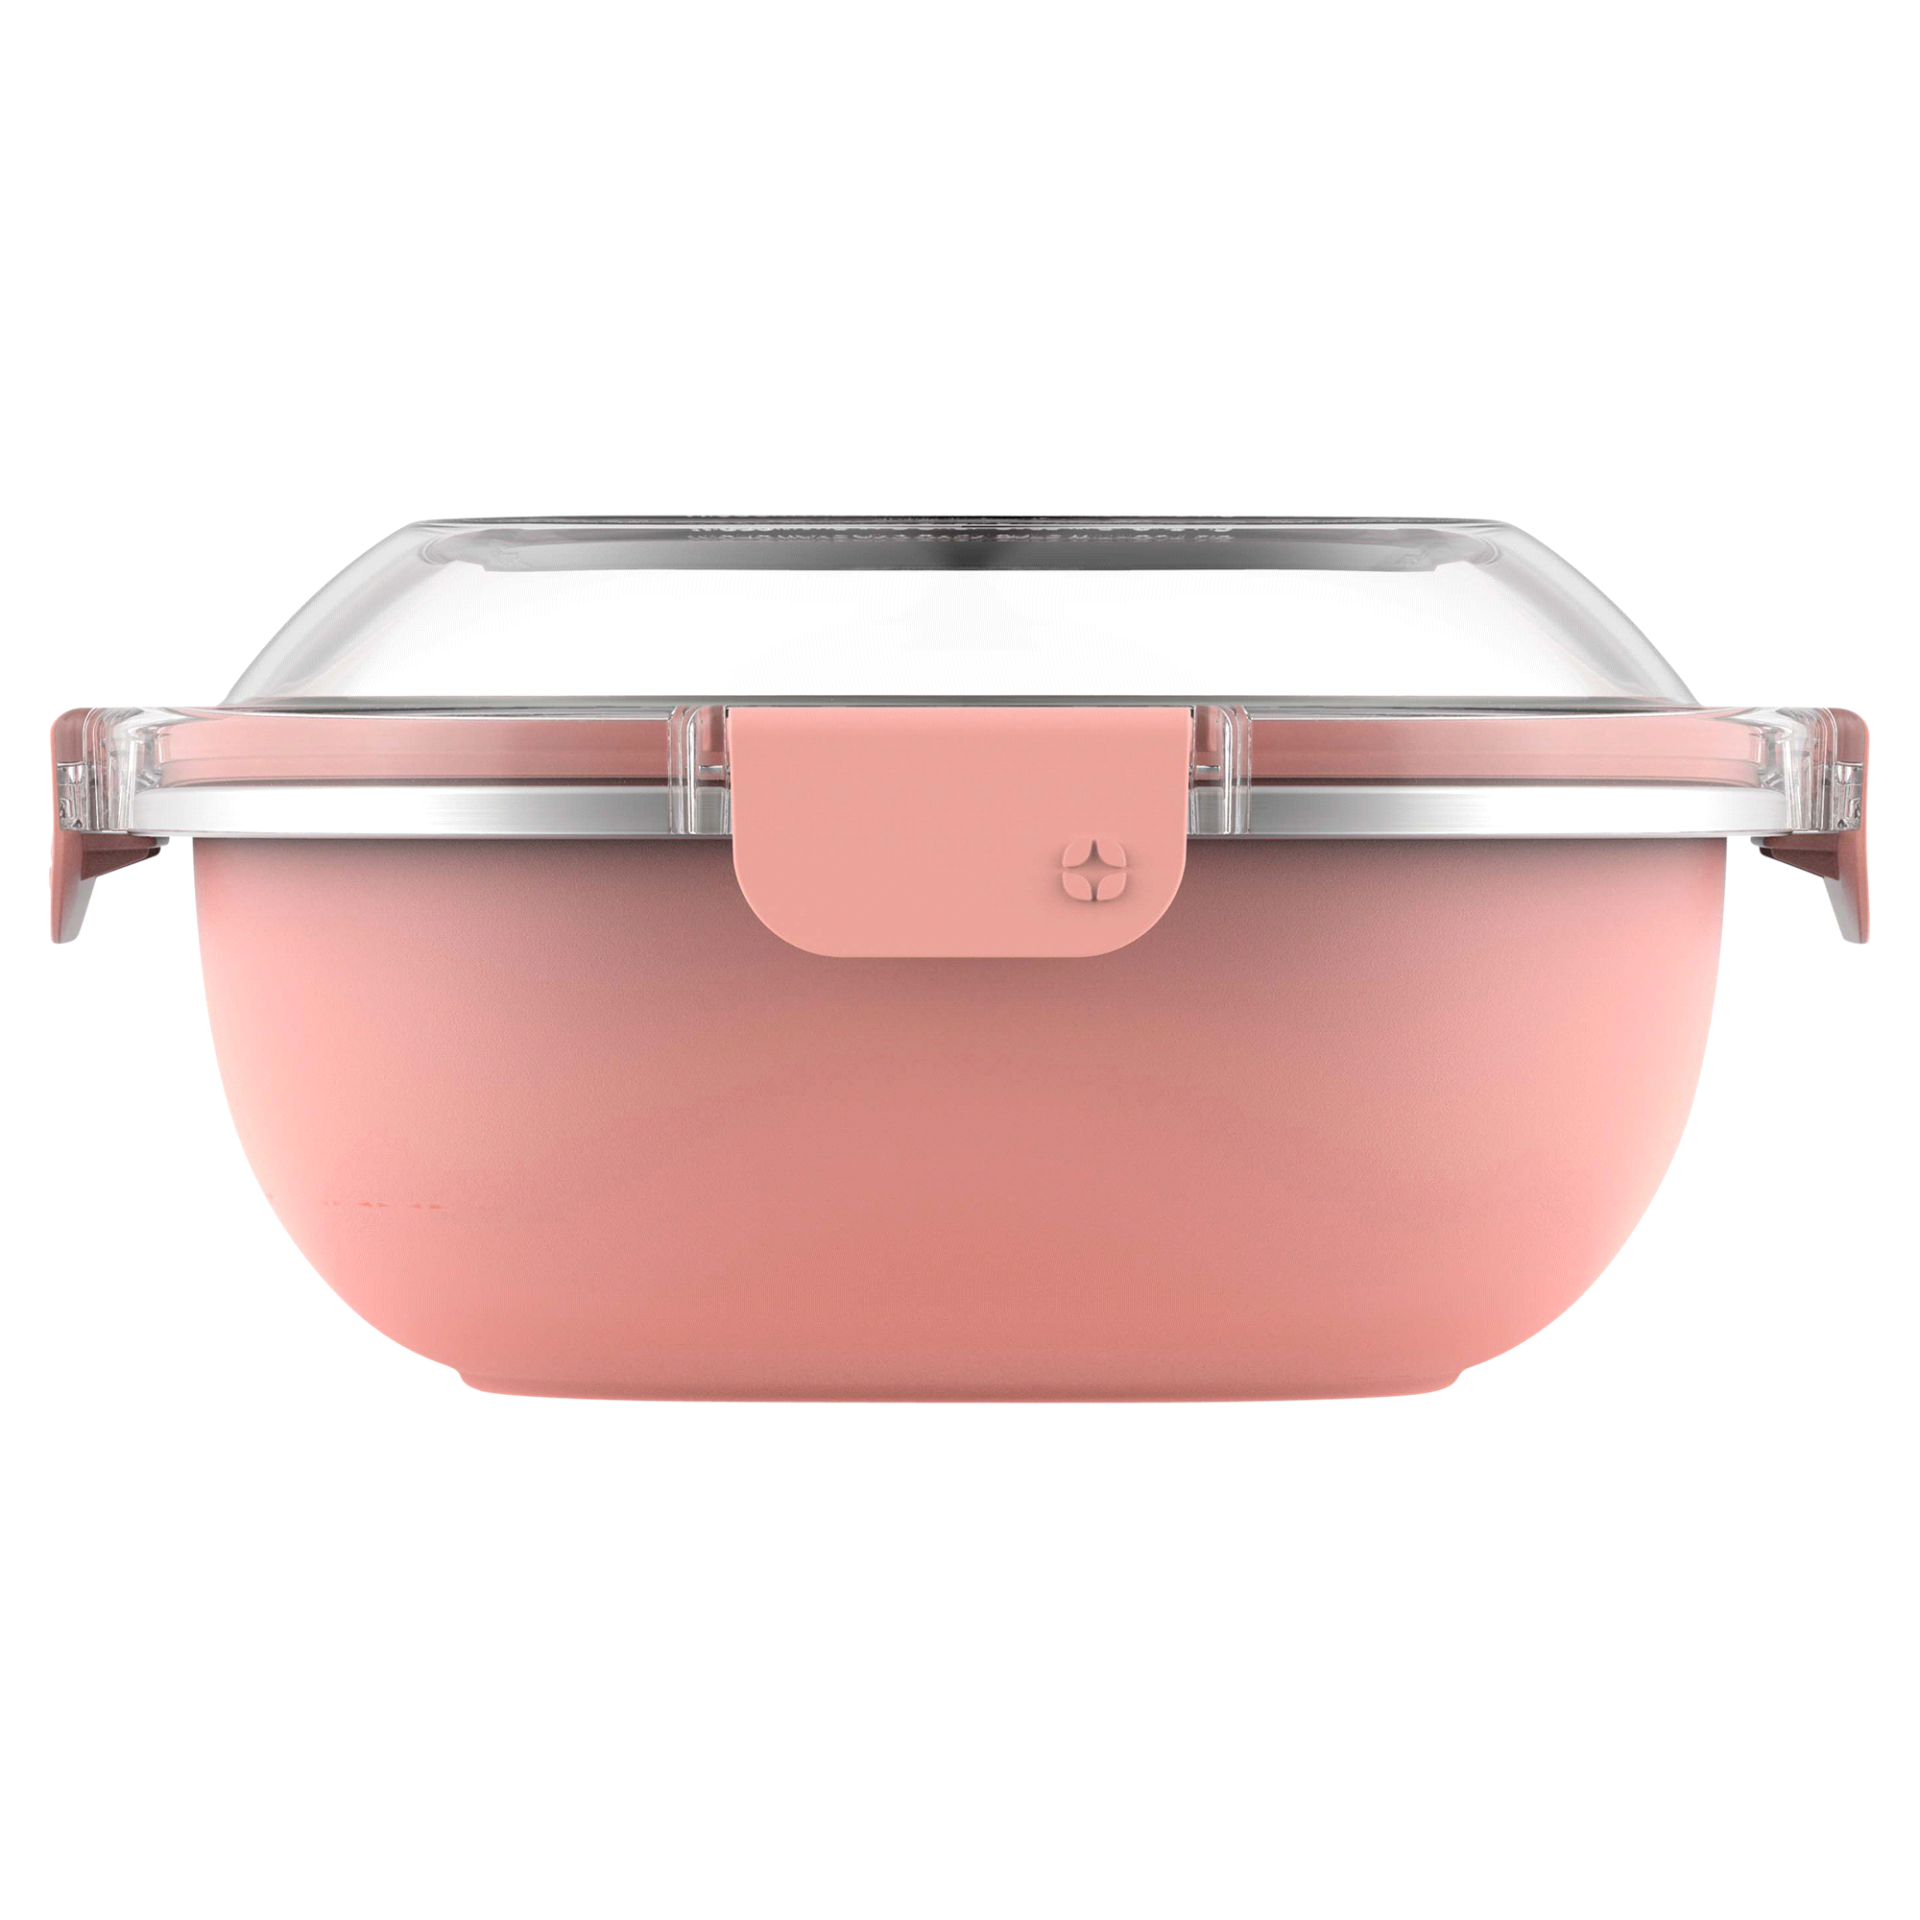 Ello Stainless Steel Salad Bowl 5 cup Peach 1 ct